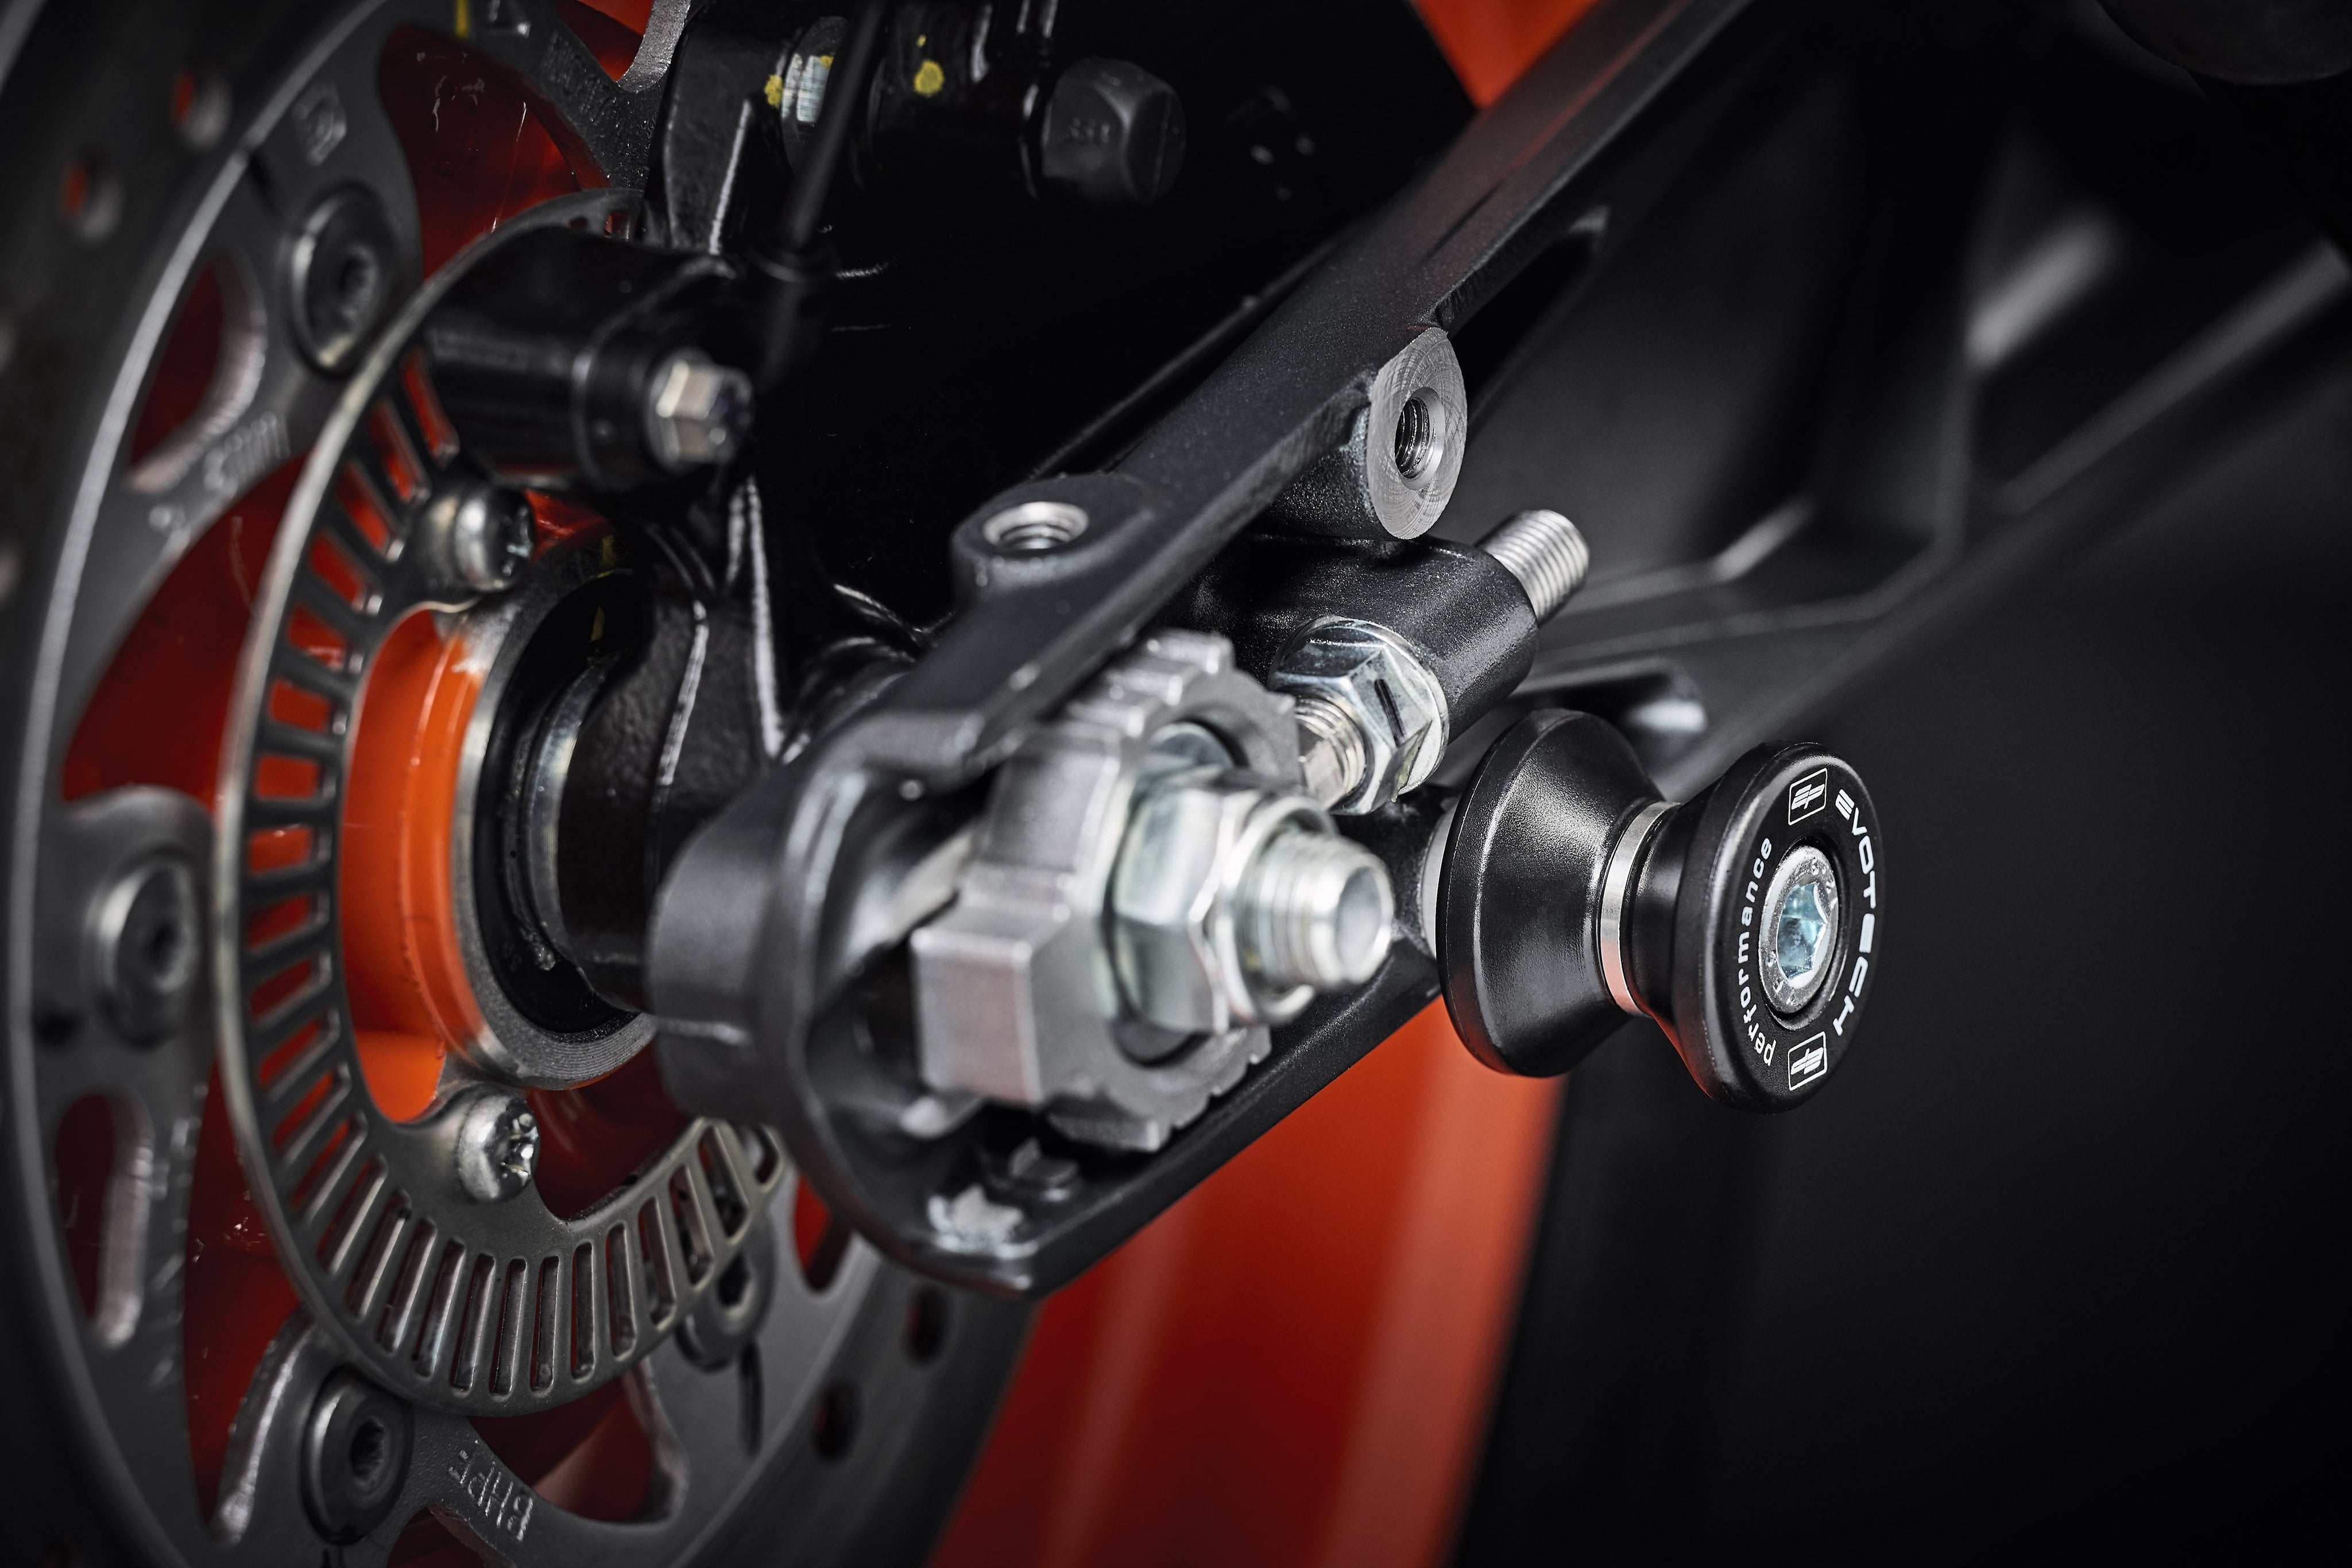 The rear wheel and swingarm of the KTM 1090 Adventure R, ready to be raised using the installed EP Paddock Stand Bobbins.